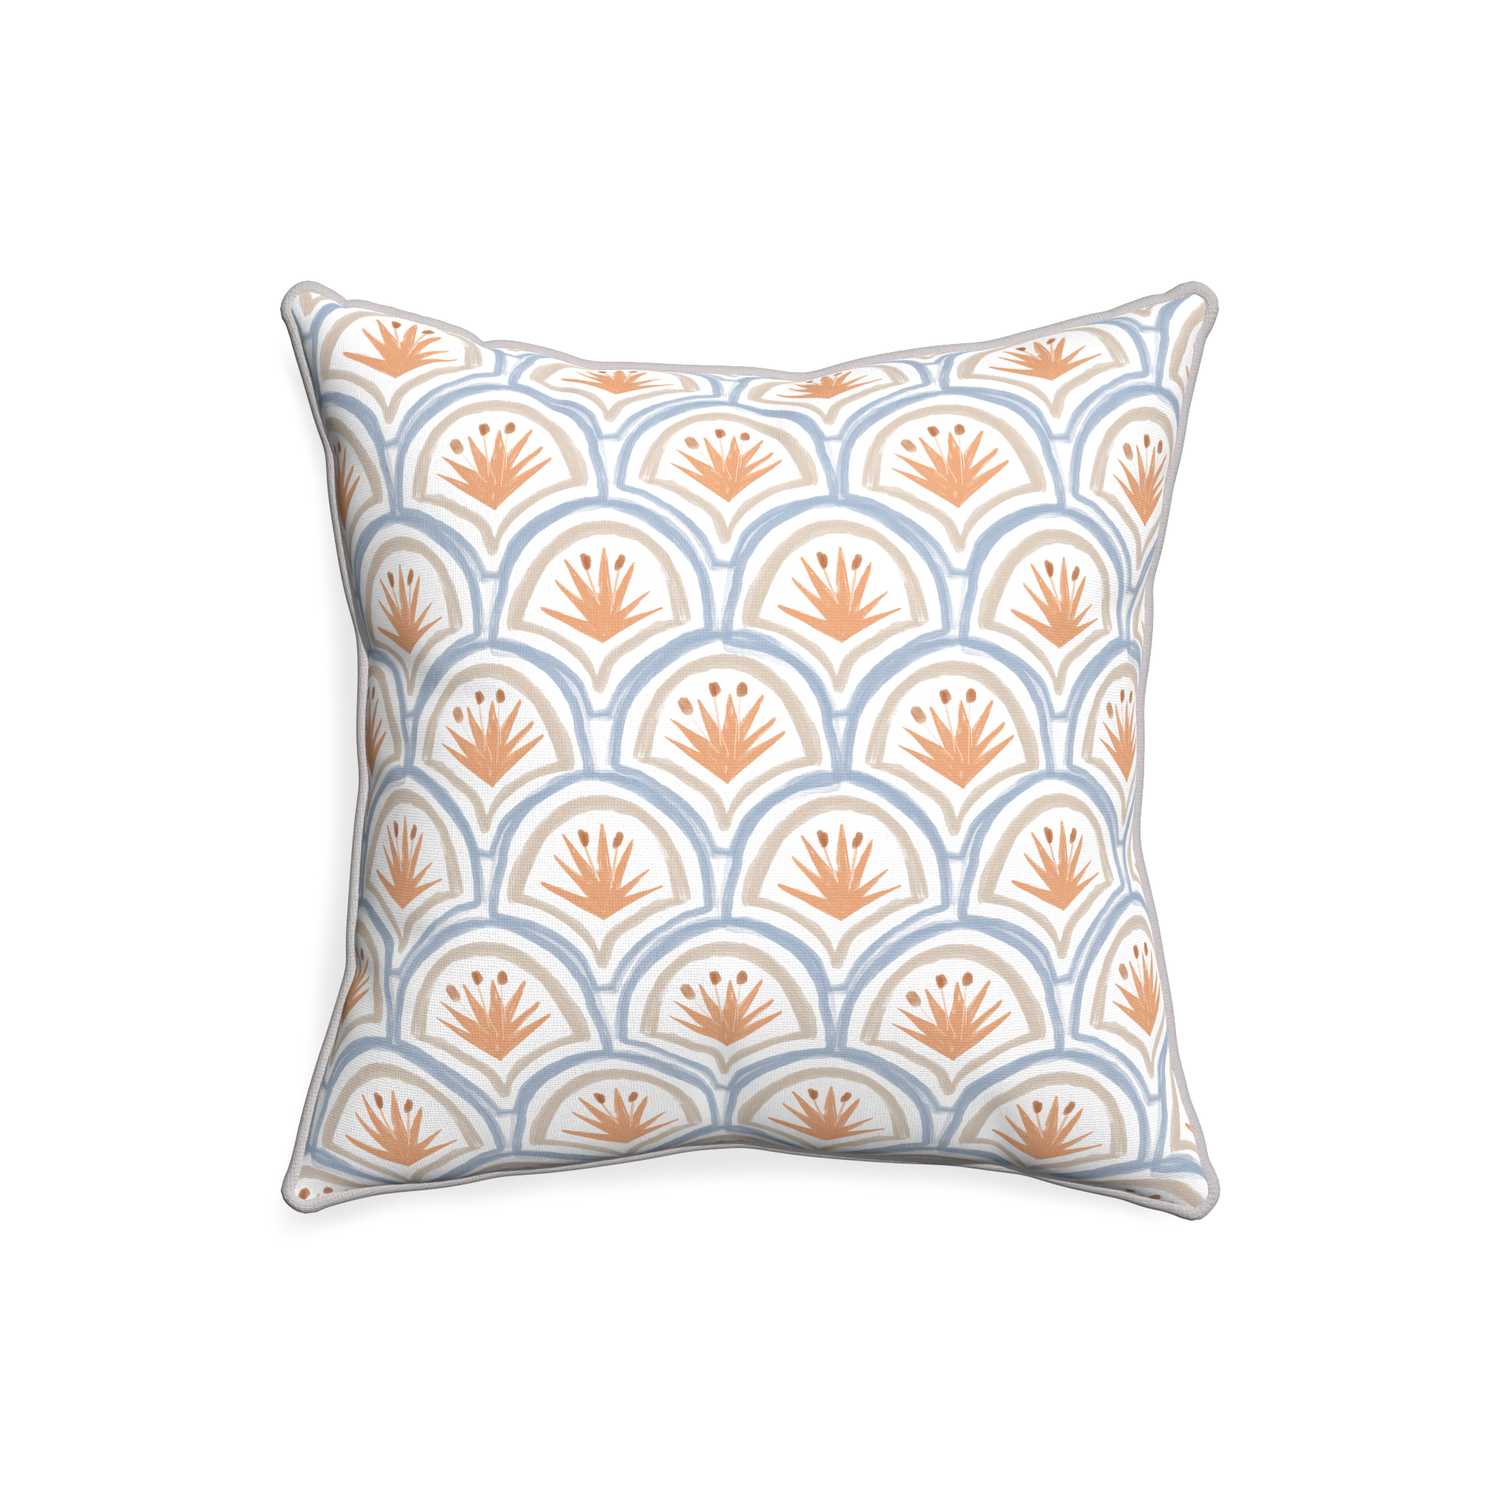 20-square thatcher apricot custom art deco palm patternpillow with pebble piping on white background